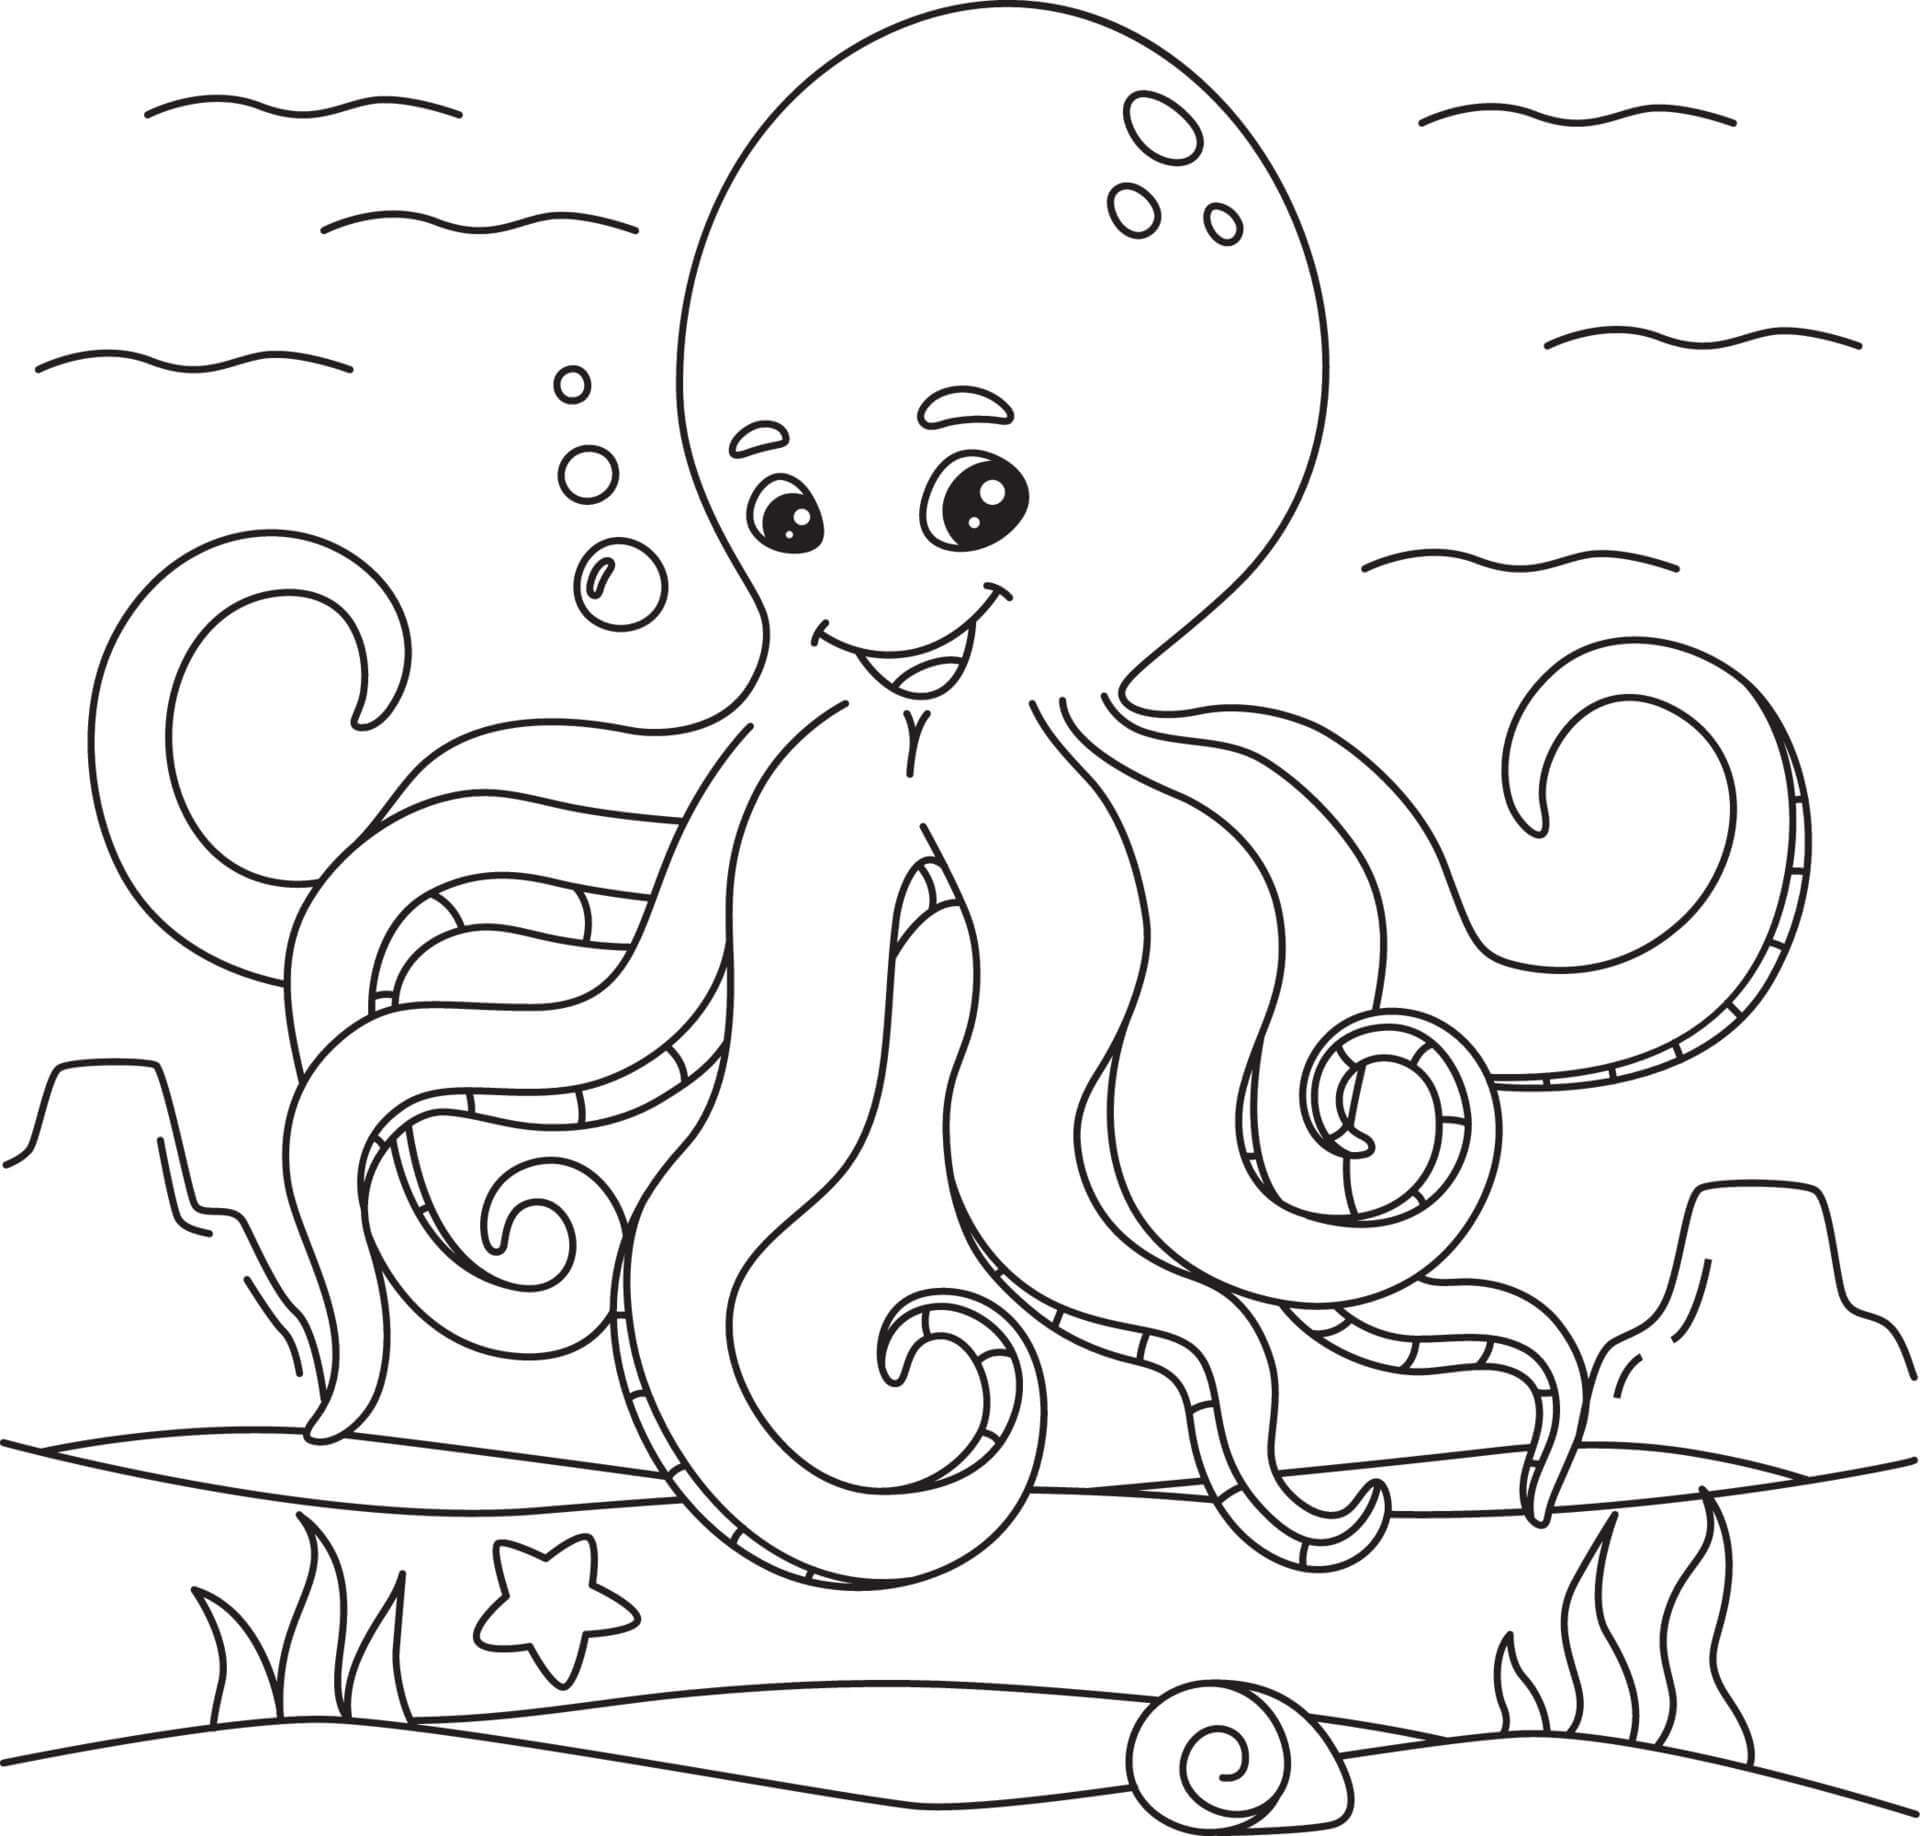 happy-octopus-coloring-page-download-print-or-color-online-for-free